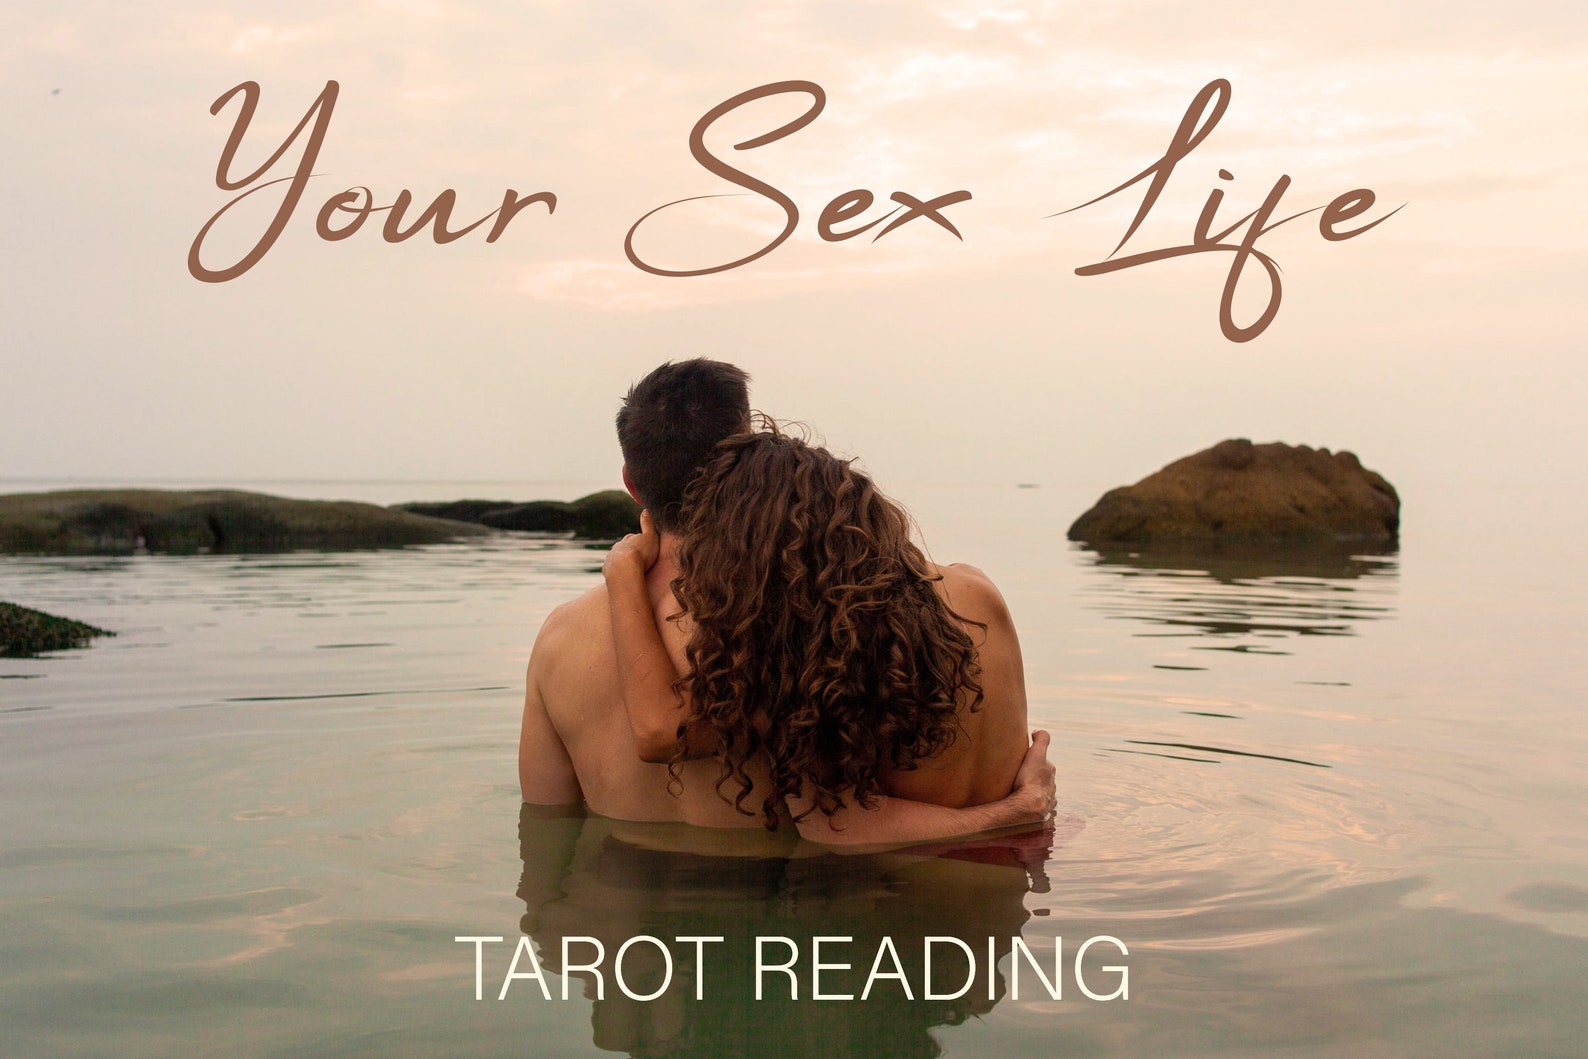 Same Day Sex Tarot Reading Accurate Erotic Reading Your Etsy